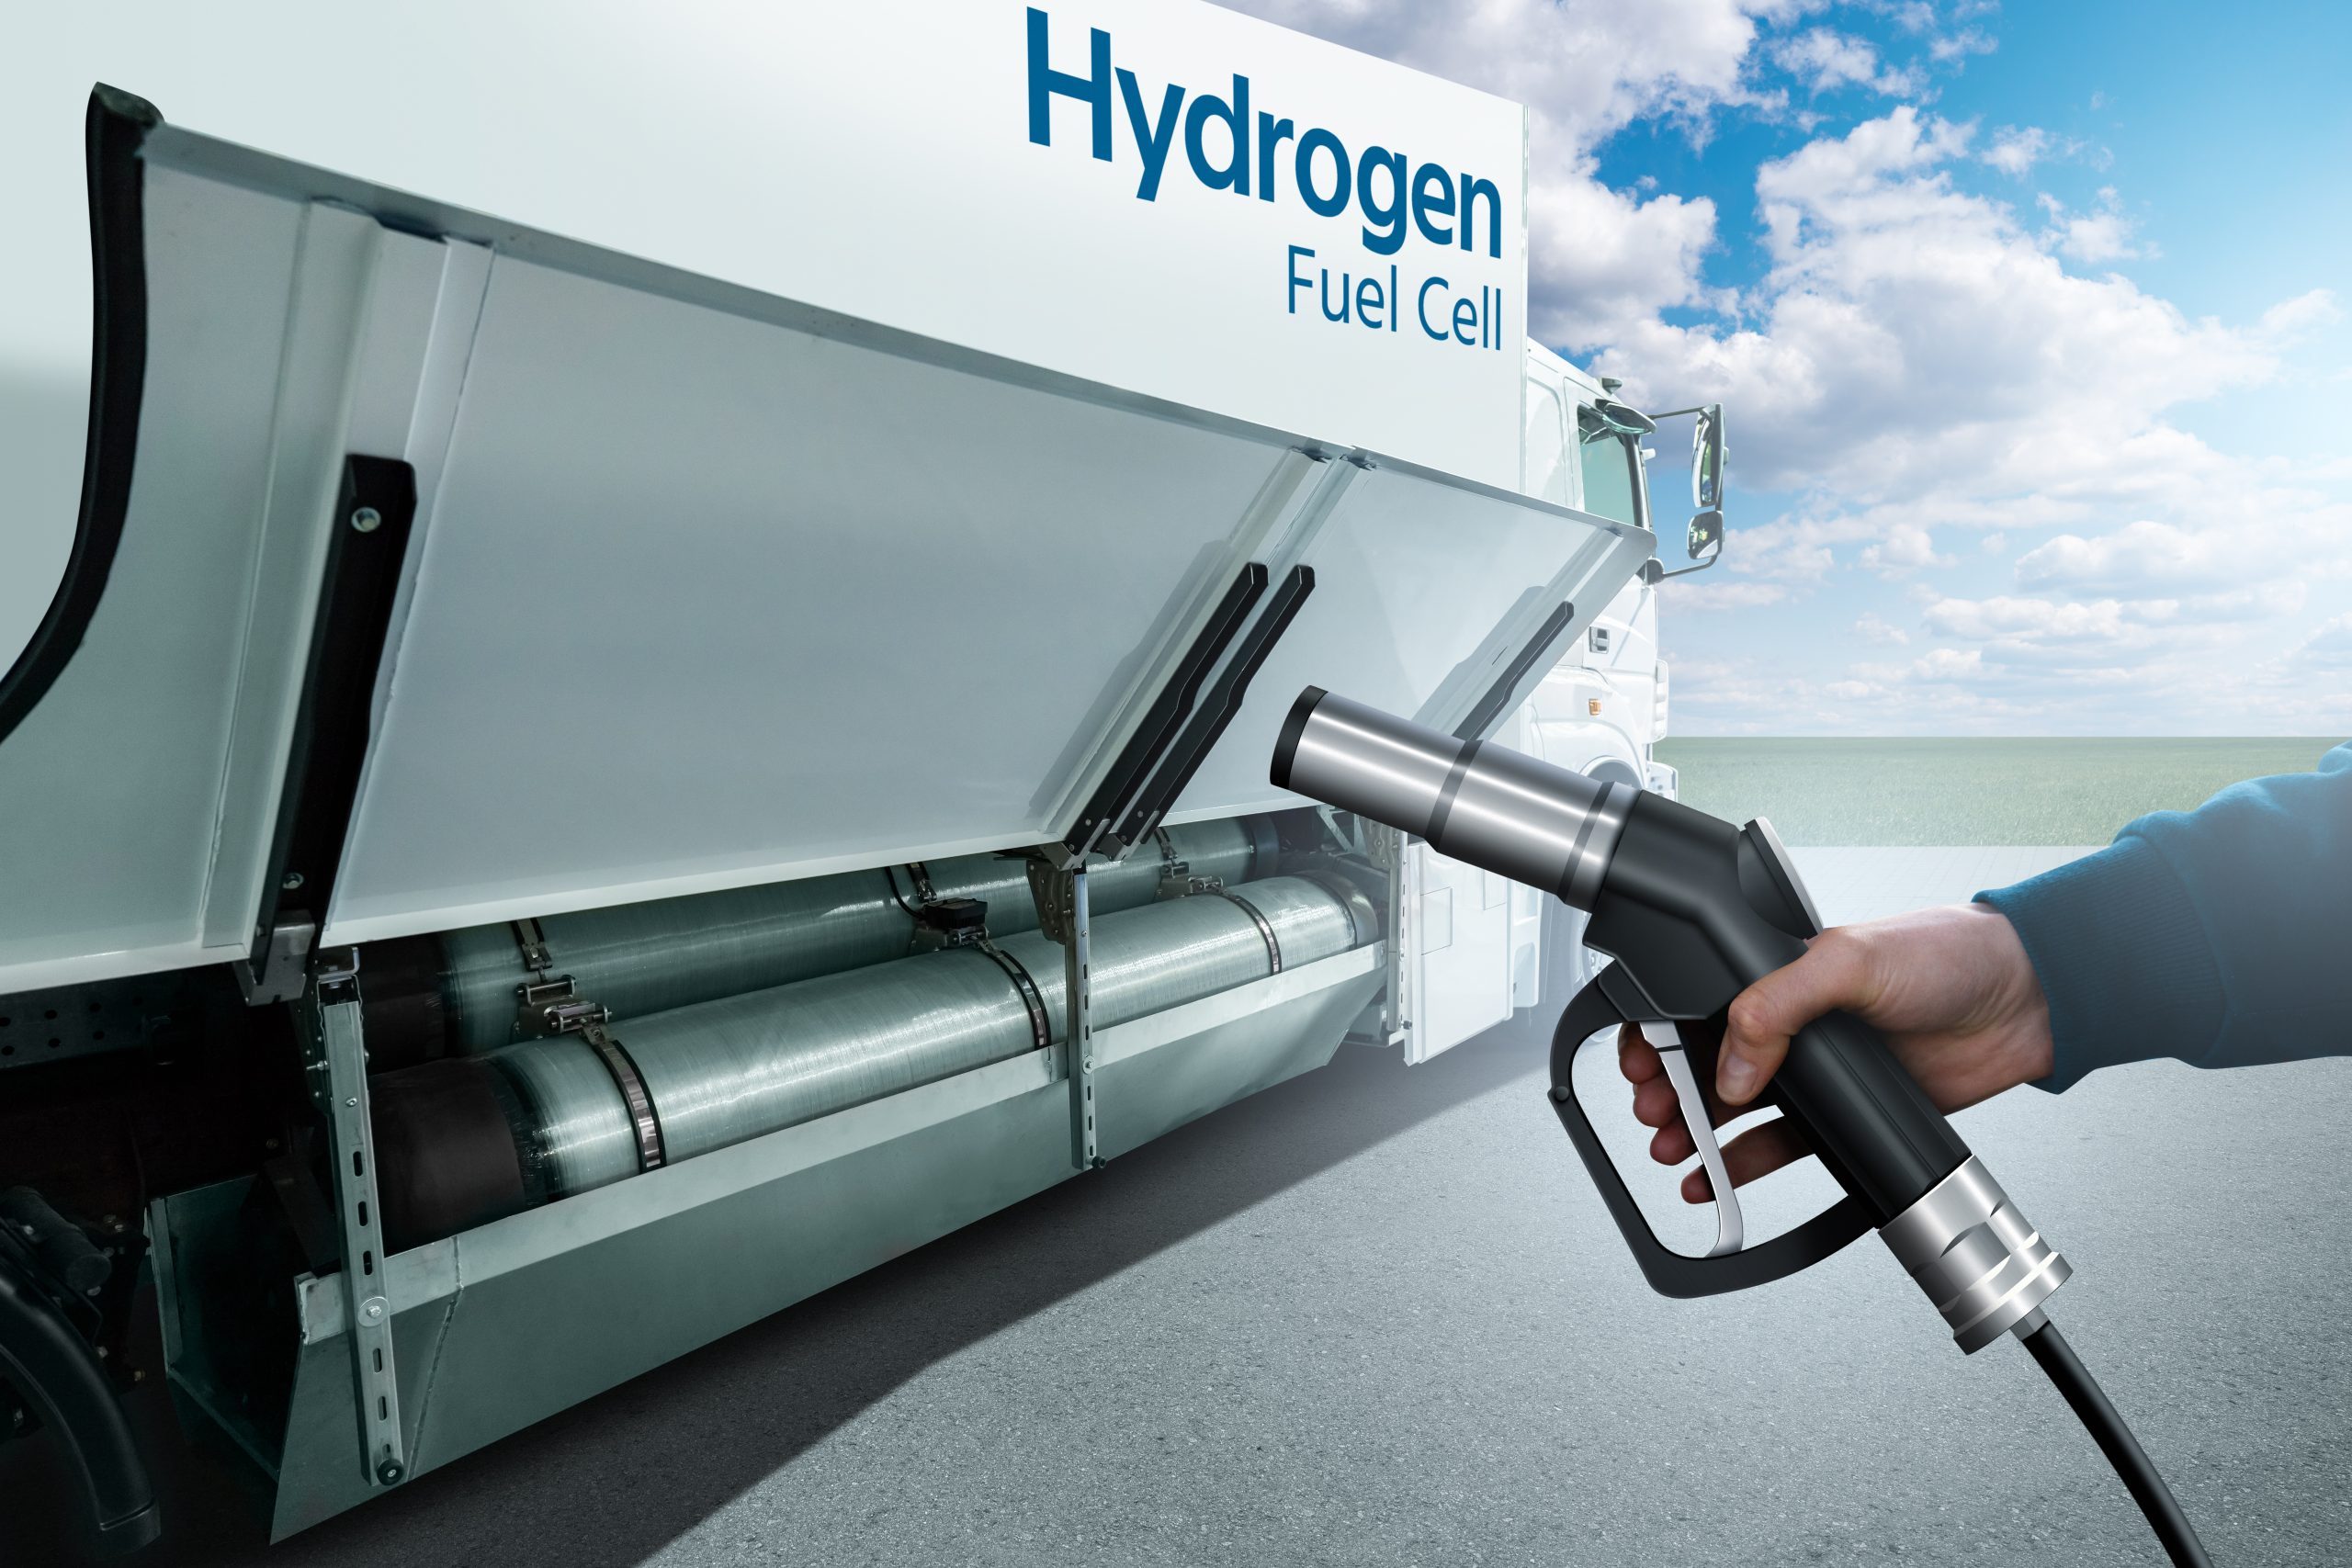 hydrogen fuel trucks in transportation and how the weigh again BEV